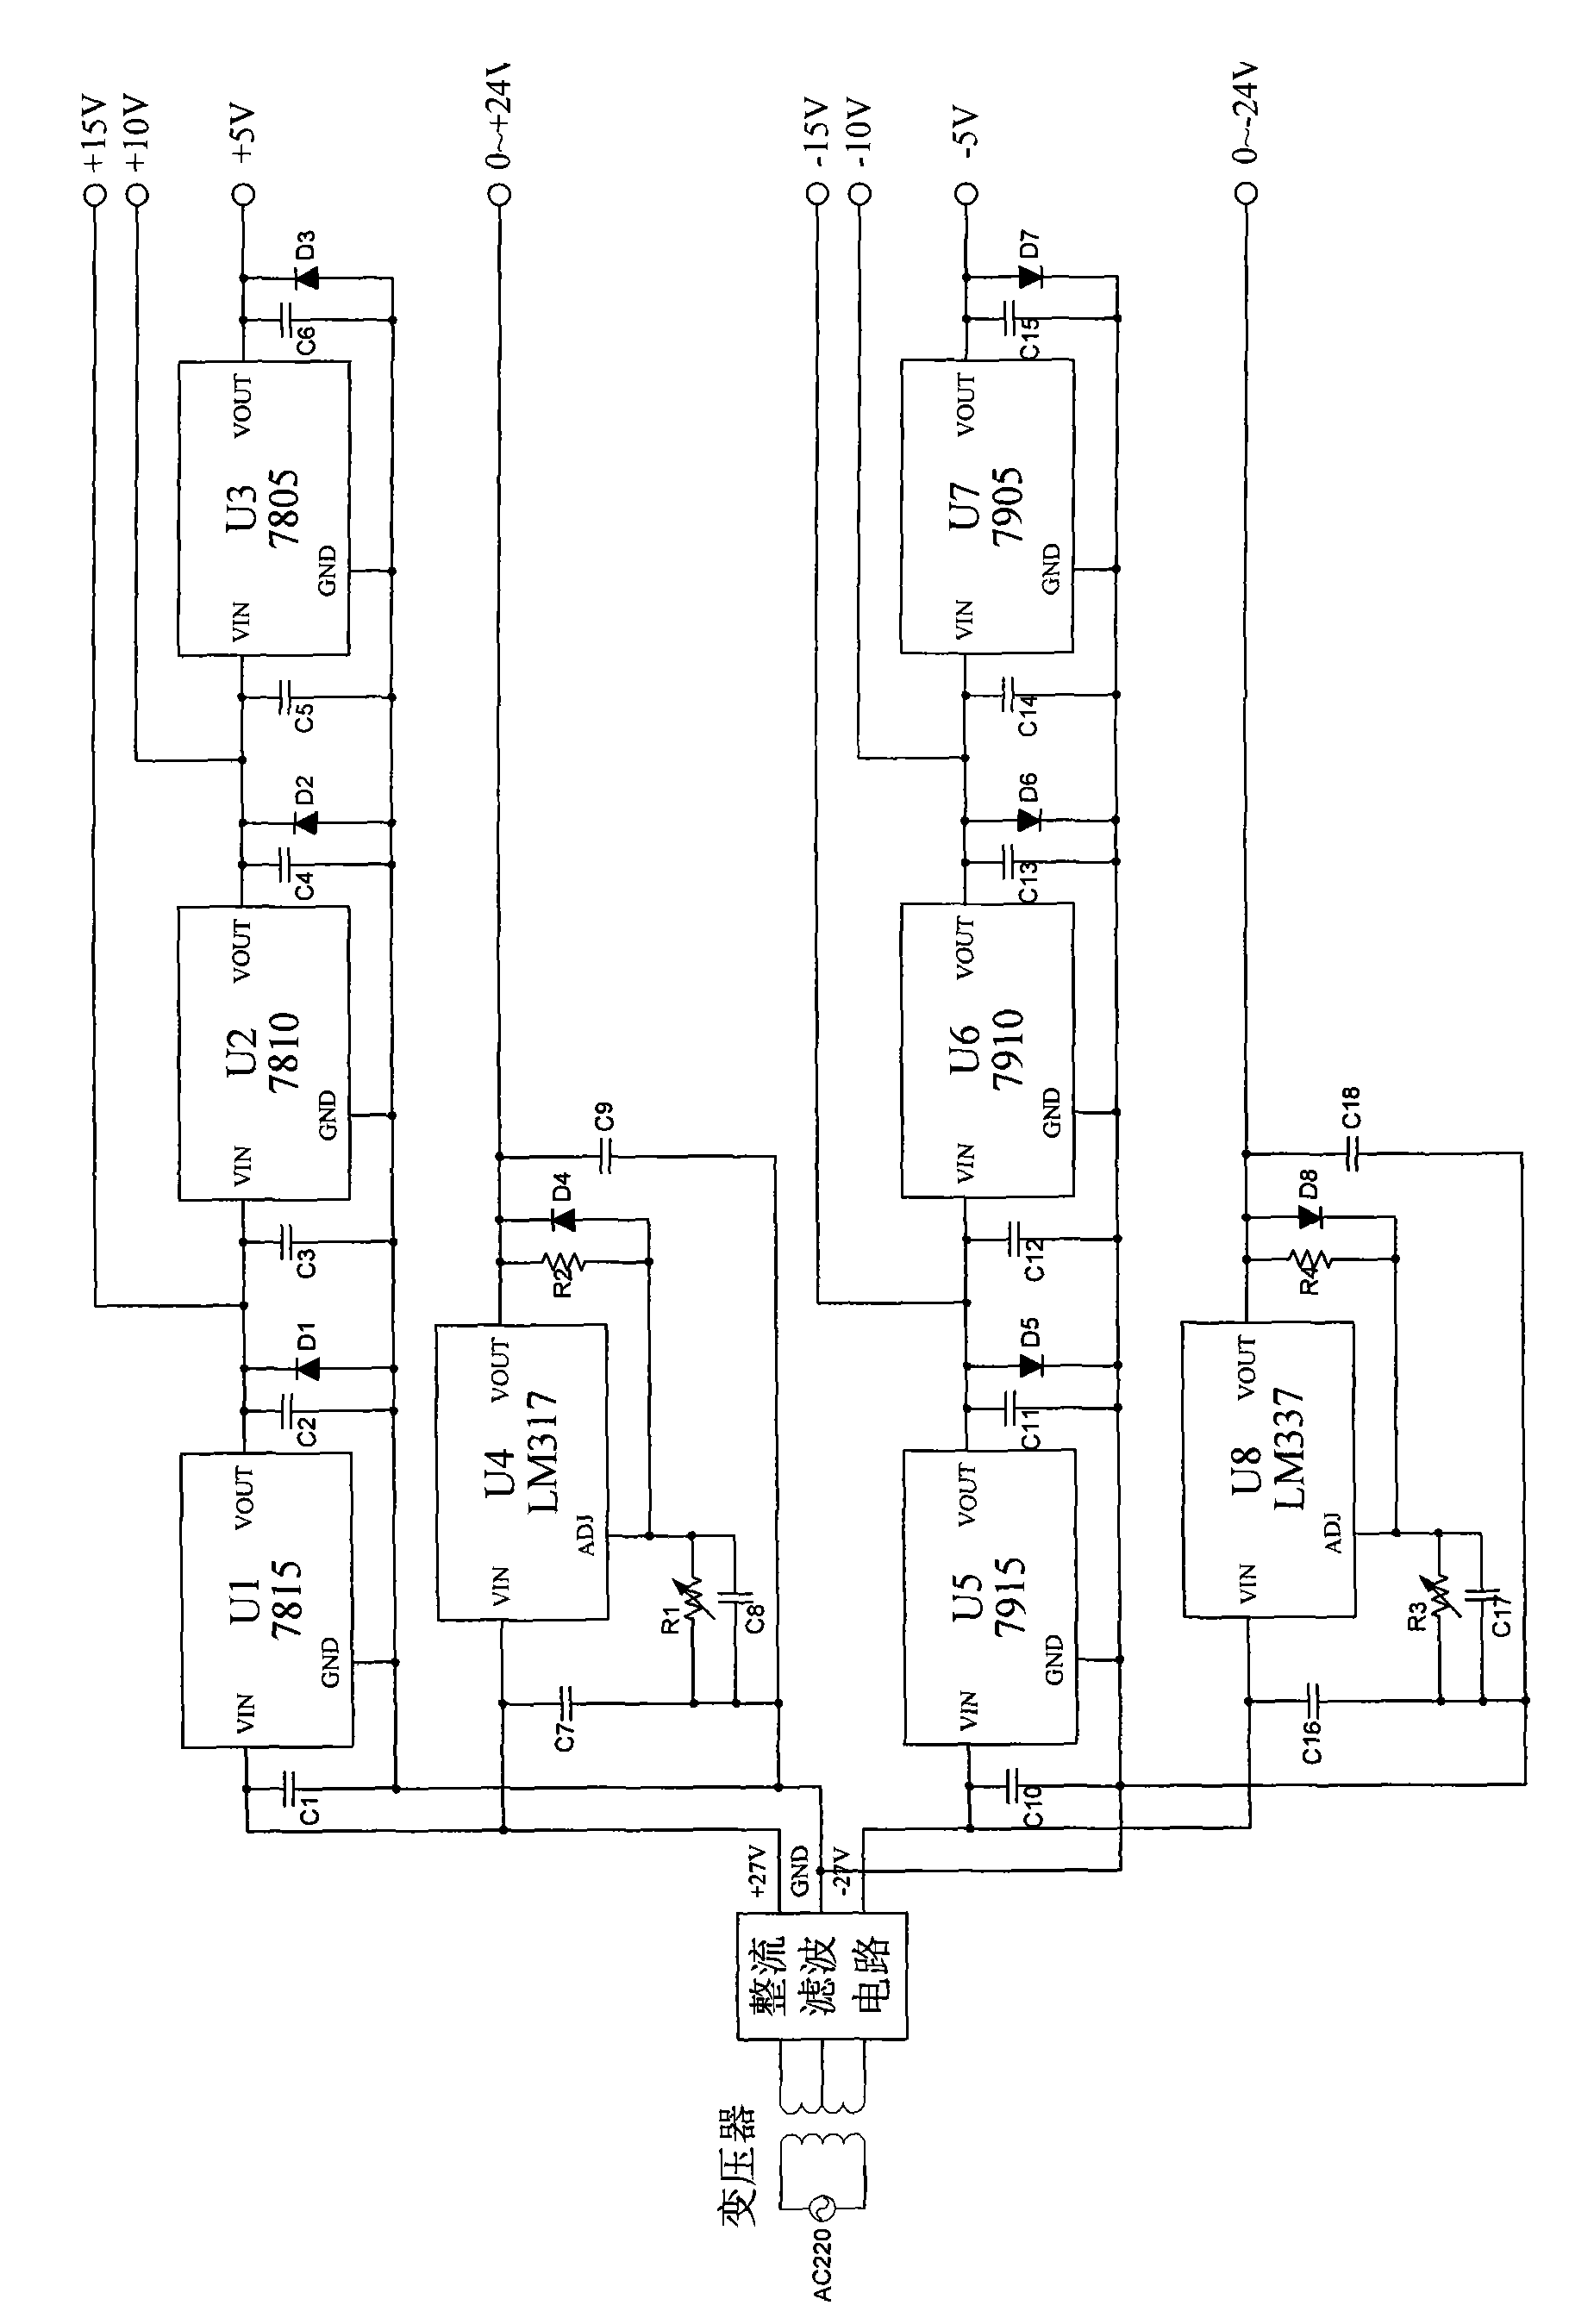 Regulated power supply used for hydraulic servo controller